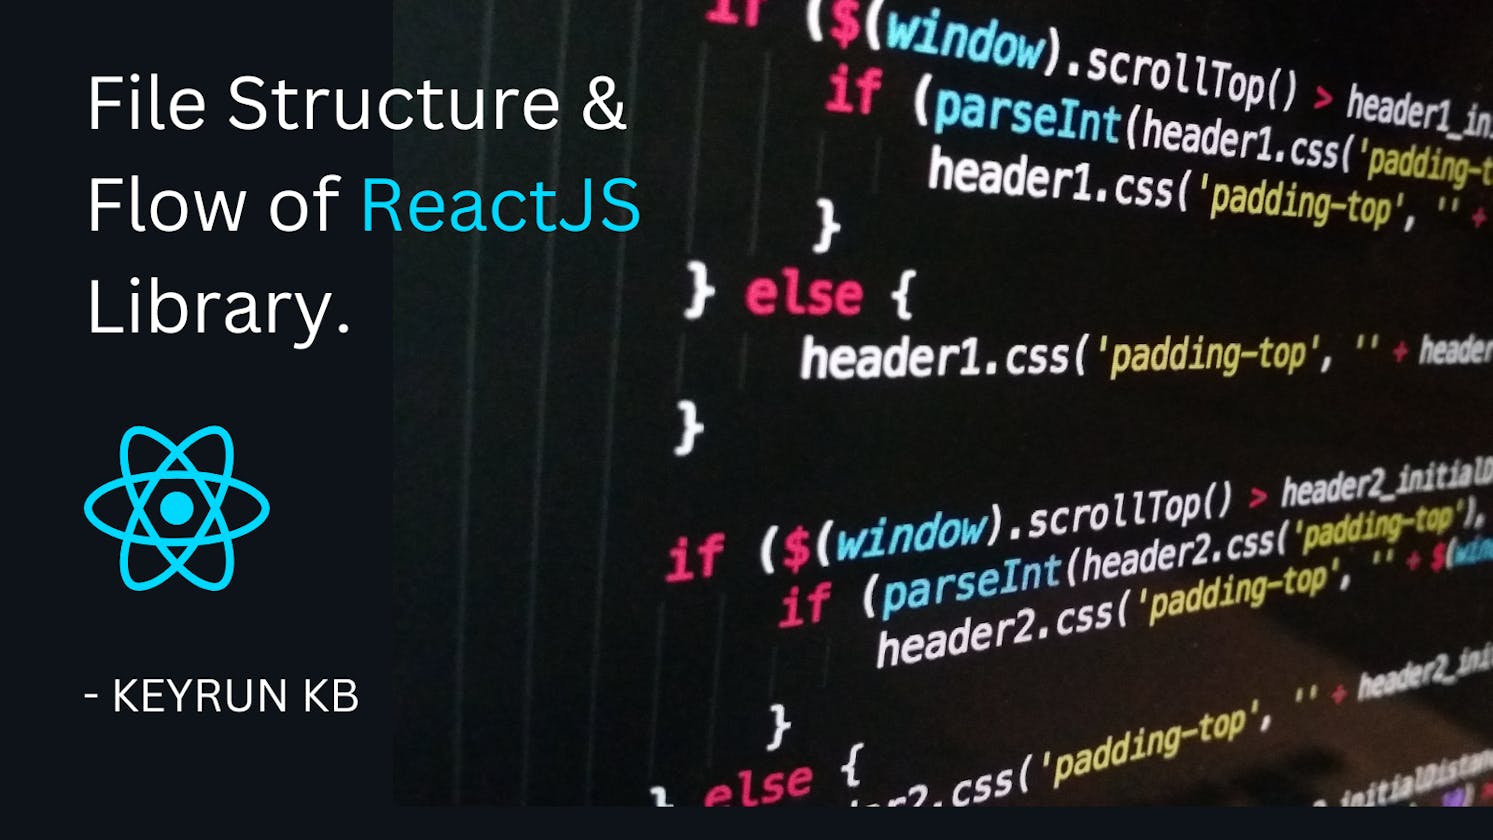 File Structure & Flow of ReactJS Library